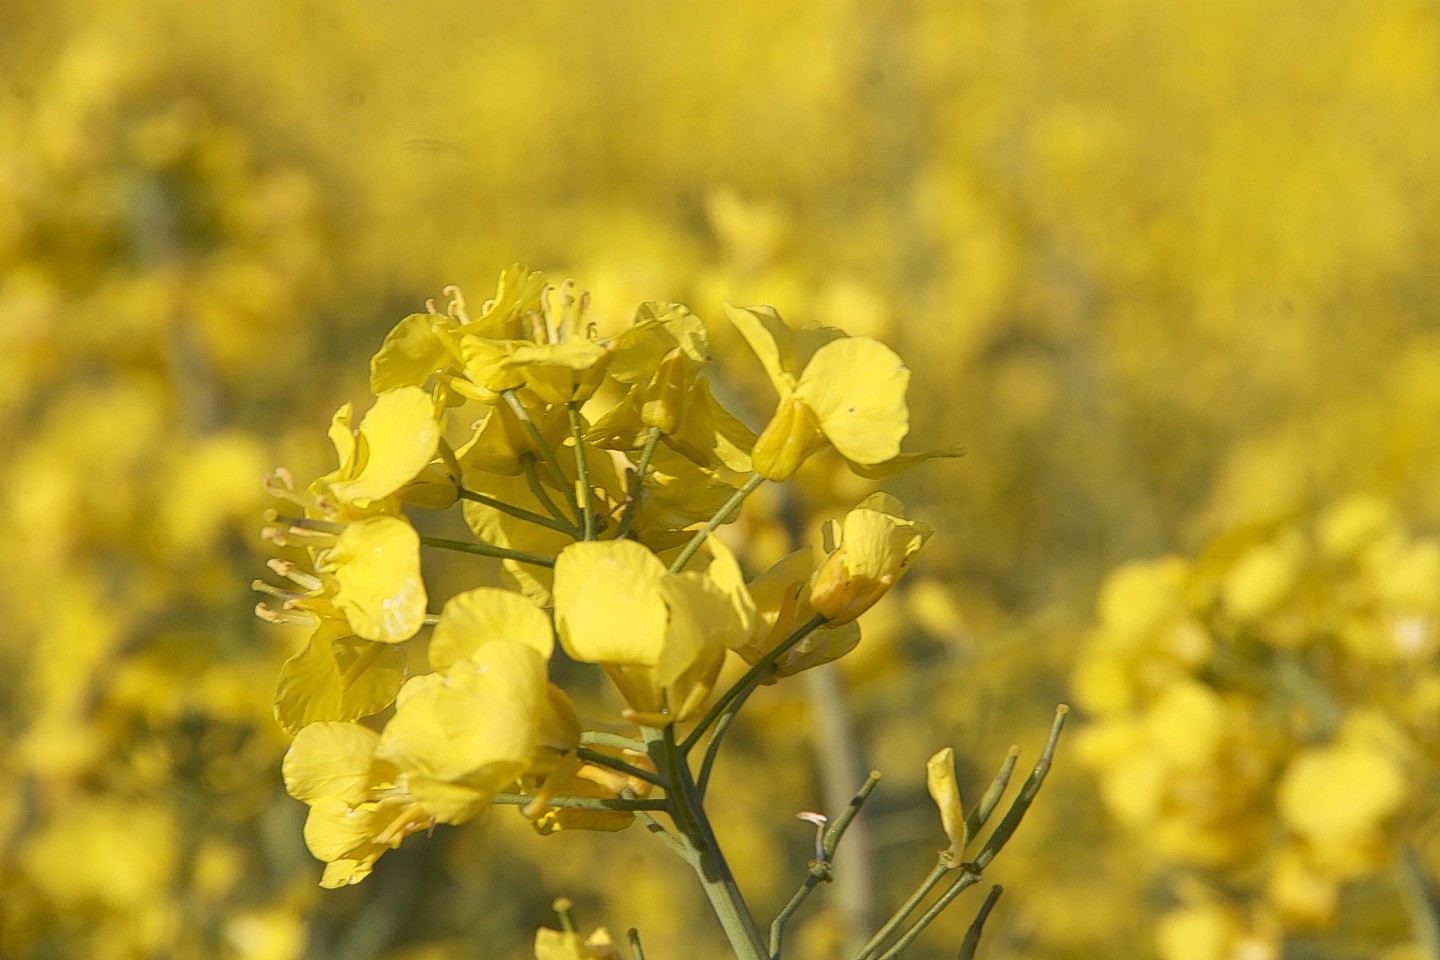 Neonicotinoid was used in seed dressing for oilseed rape